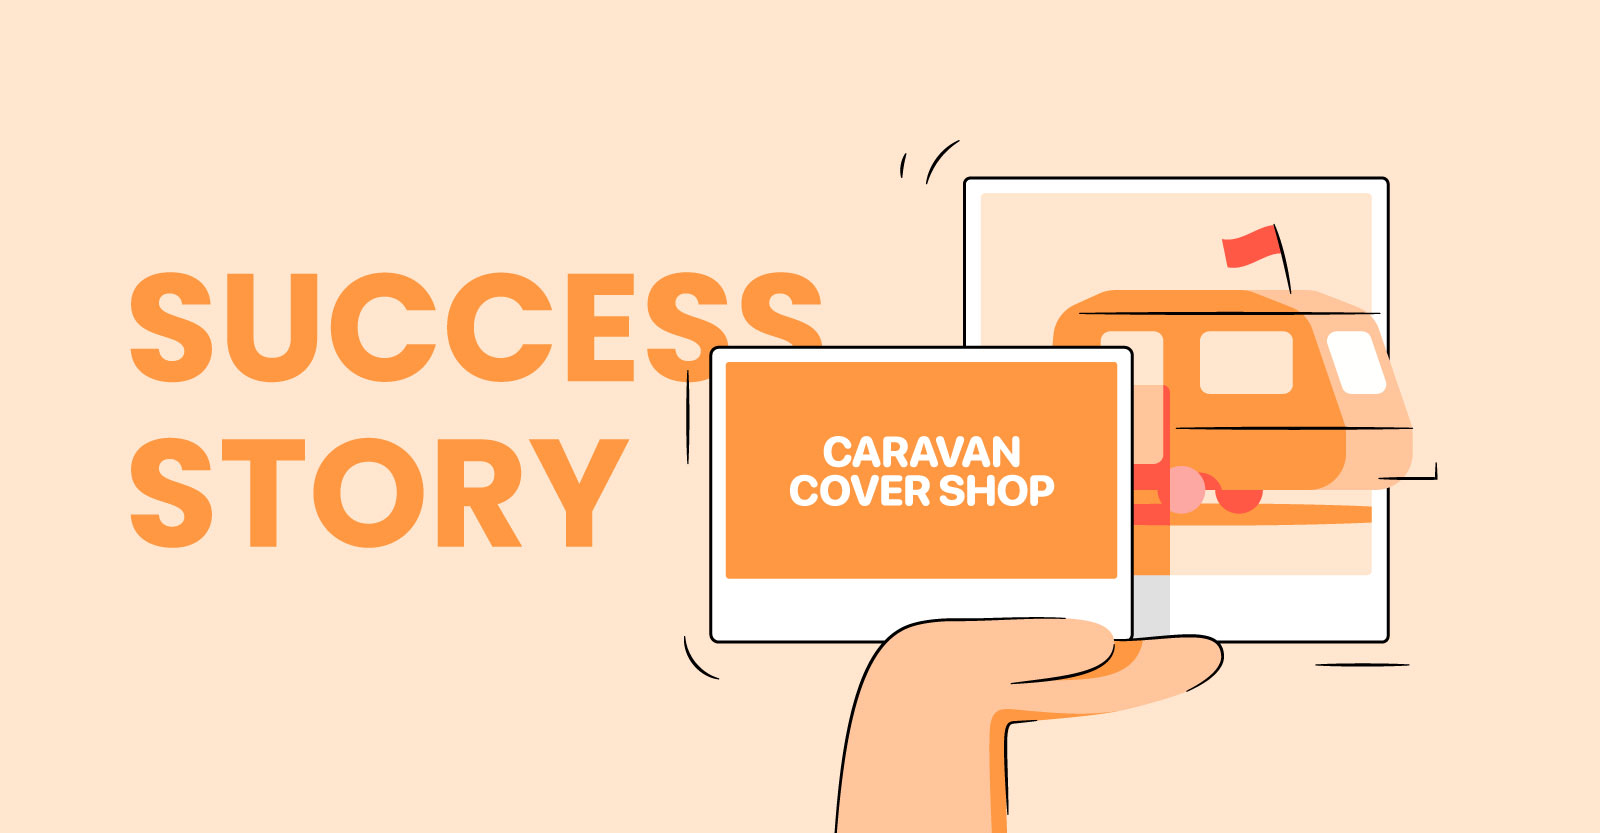 TinyIMG cuts load time by 3 seconds and achieves SEO score of 90 for Caravan Cover Shop